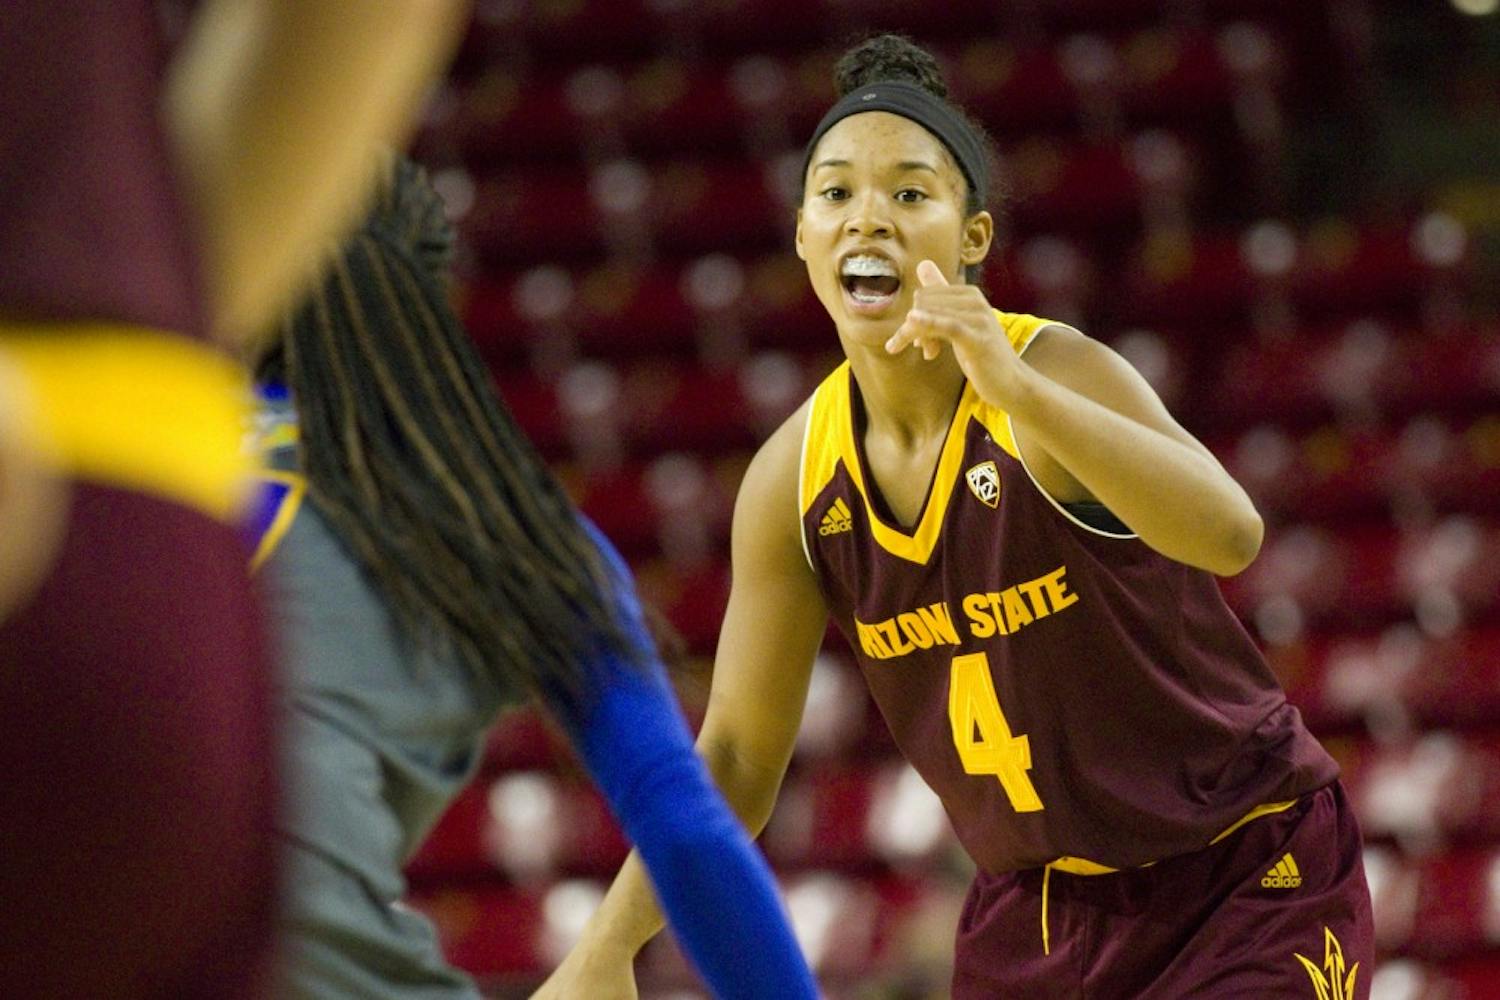 ASU freshman guard Kiara Russell (4) calls a play in the 82-37 victory over the San Jose State Spartans in Wells Fargo Arena in Tempe, Arizona, on Sunday, Nov. 13, 2016. Russell had 8 points and 3 assists in the win.